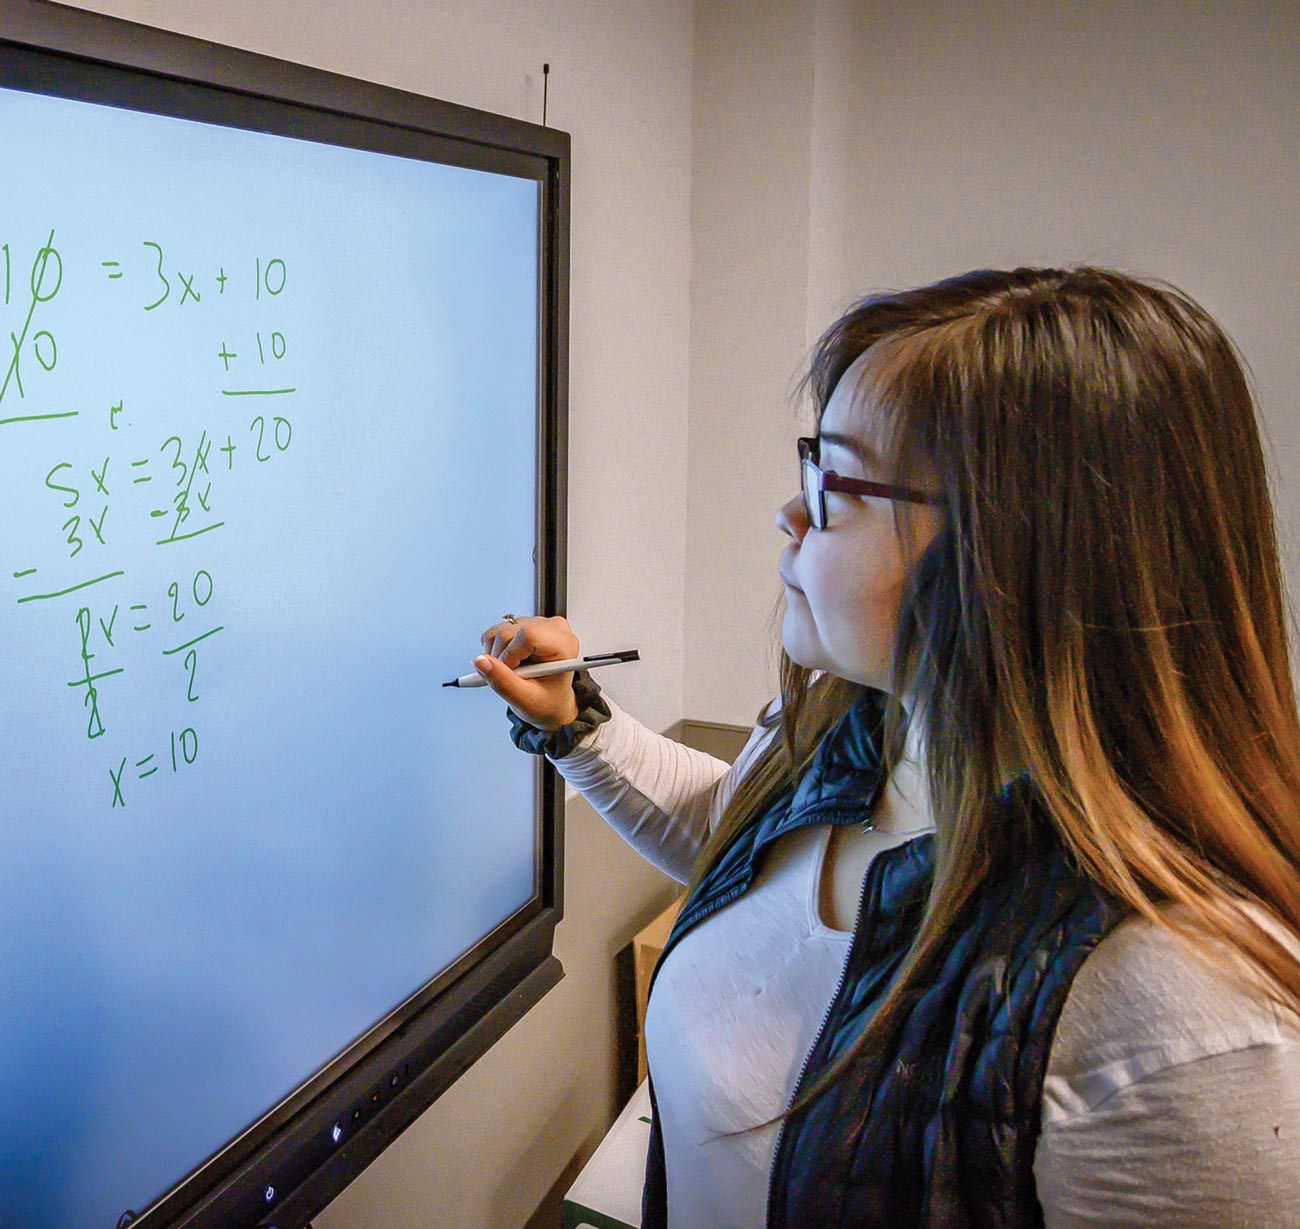 A student at the Kusilvak Career Academy uses technology in the form of an electronic whiteboard to facilitate learning